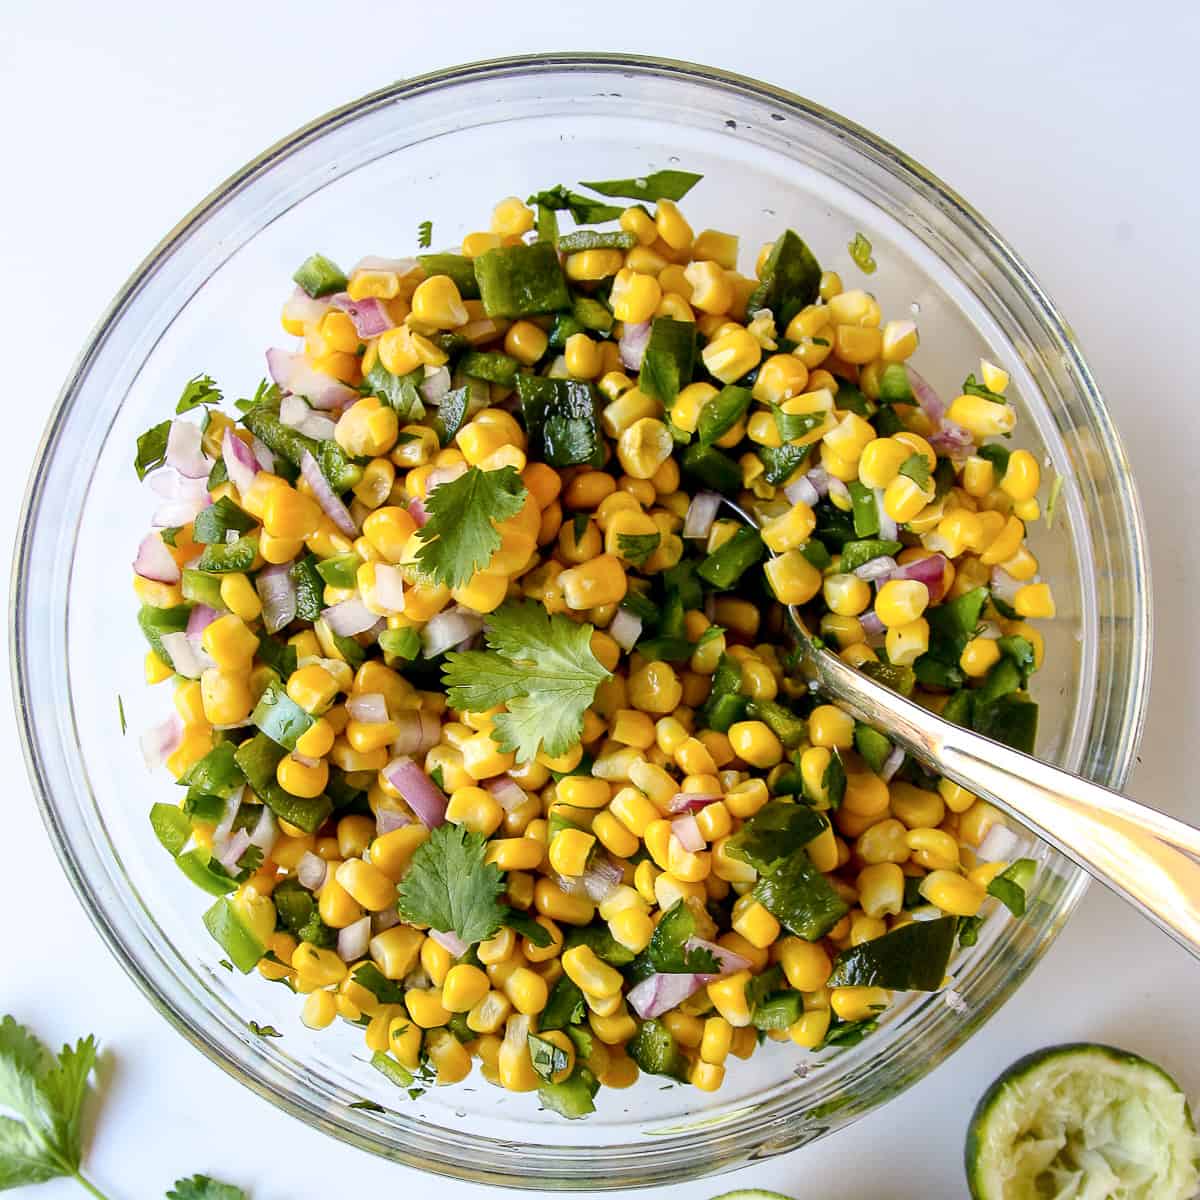 Roasted chili corn salsa in a glass bowl with a spoon.